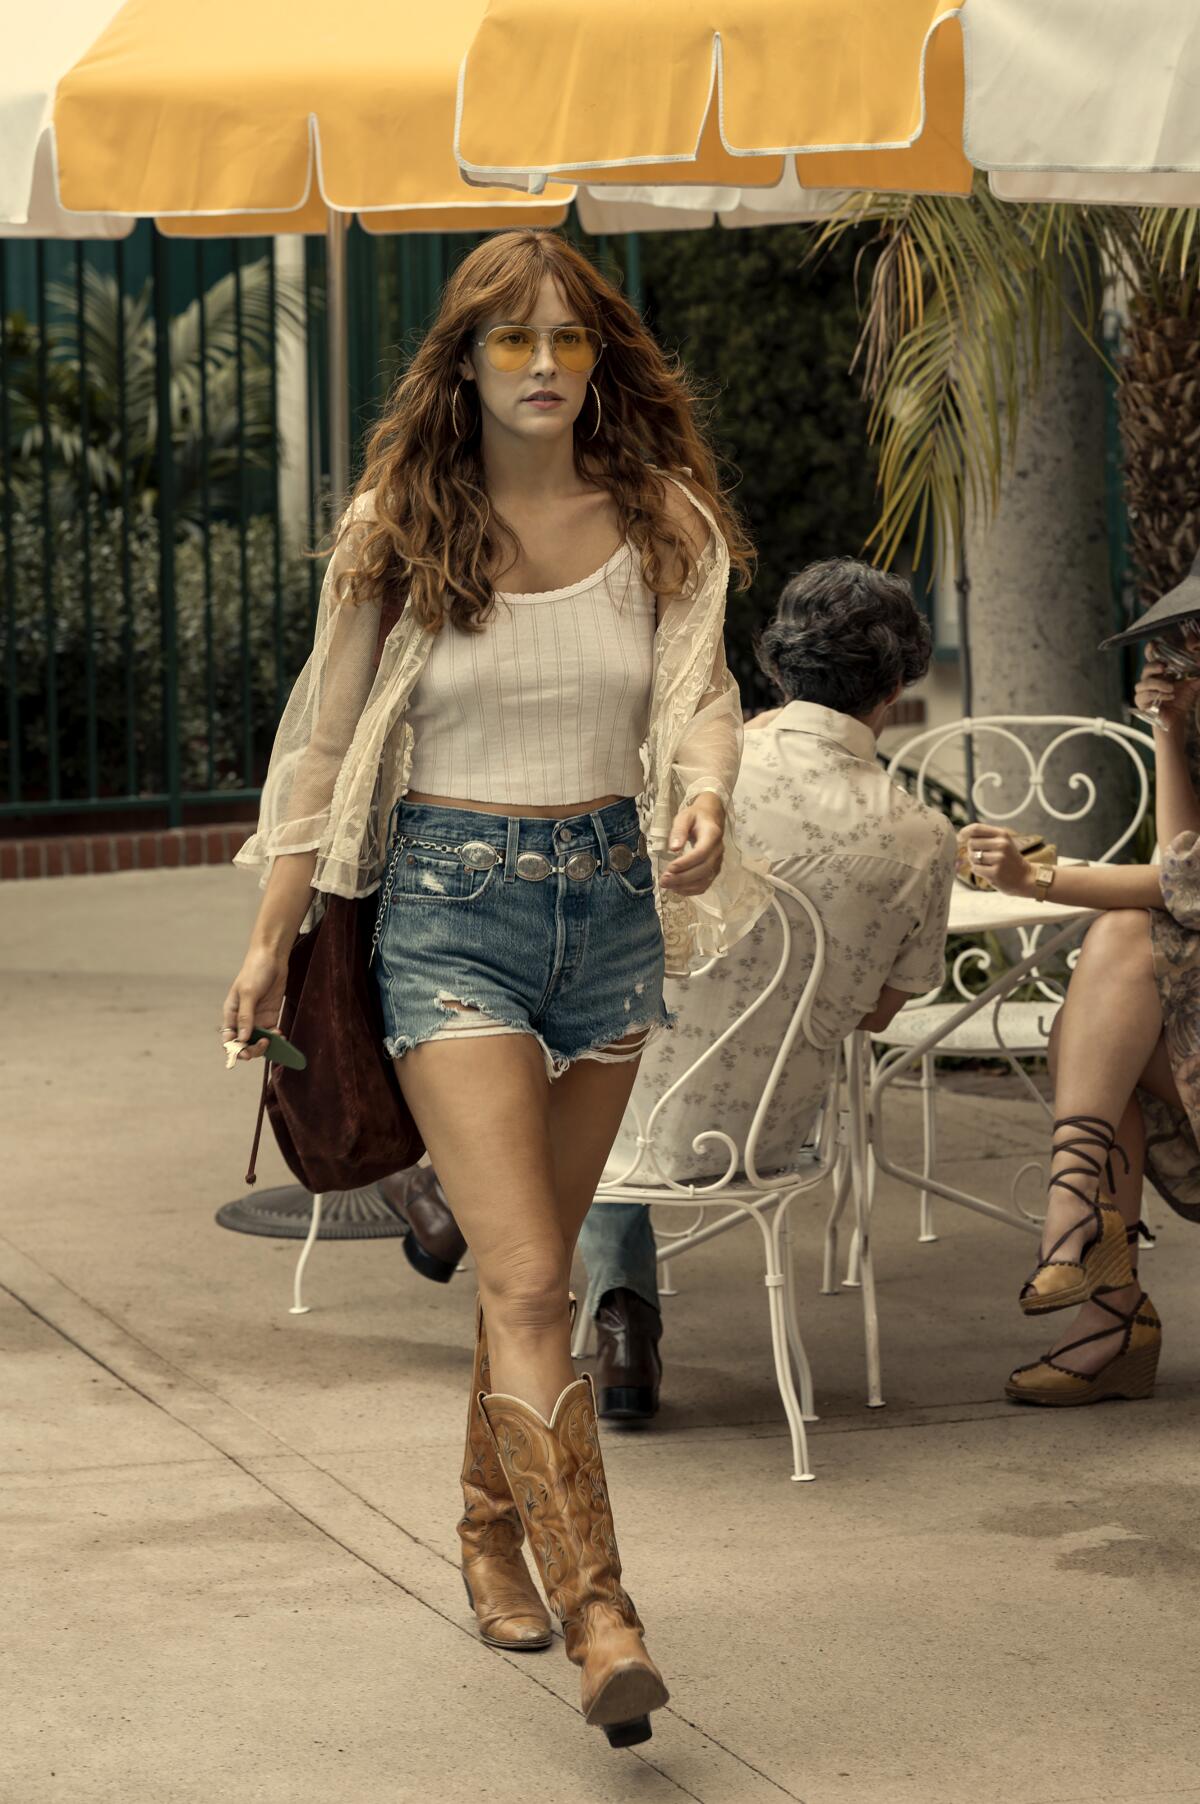 As Daisy Jones, Riley Keough wears denim shorts and boots.